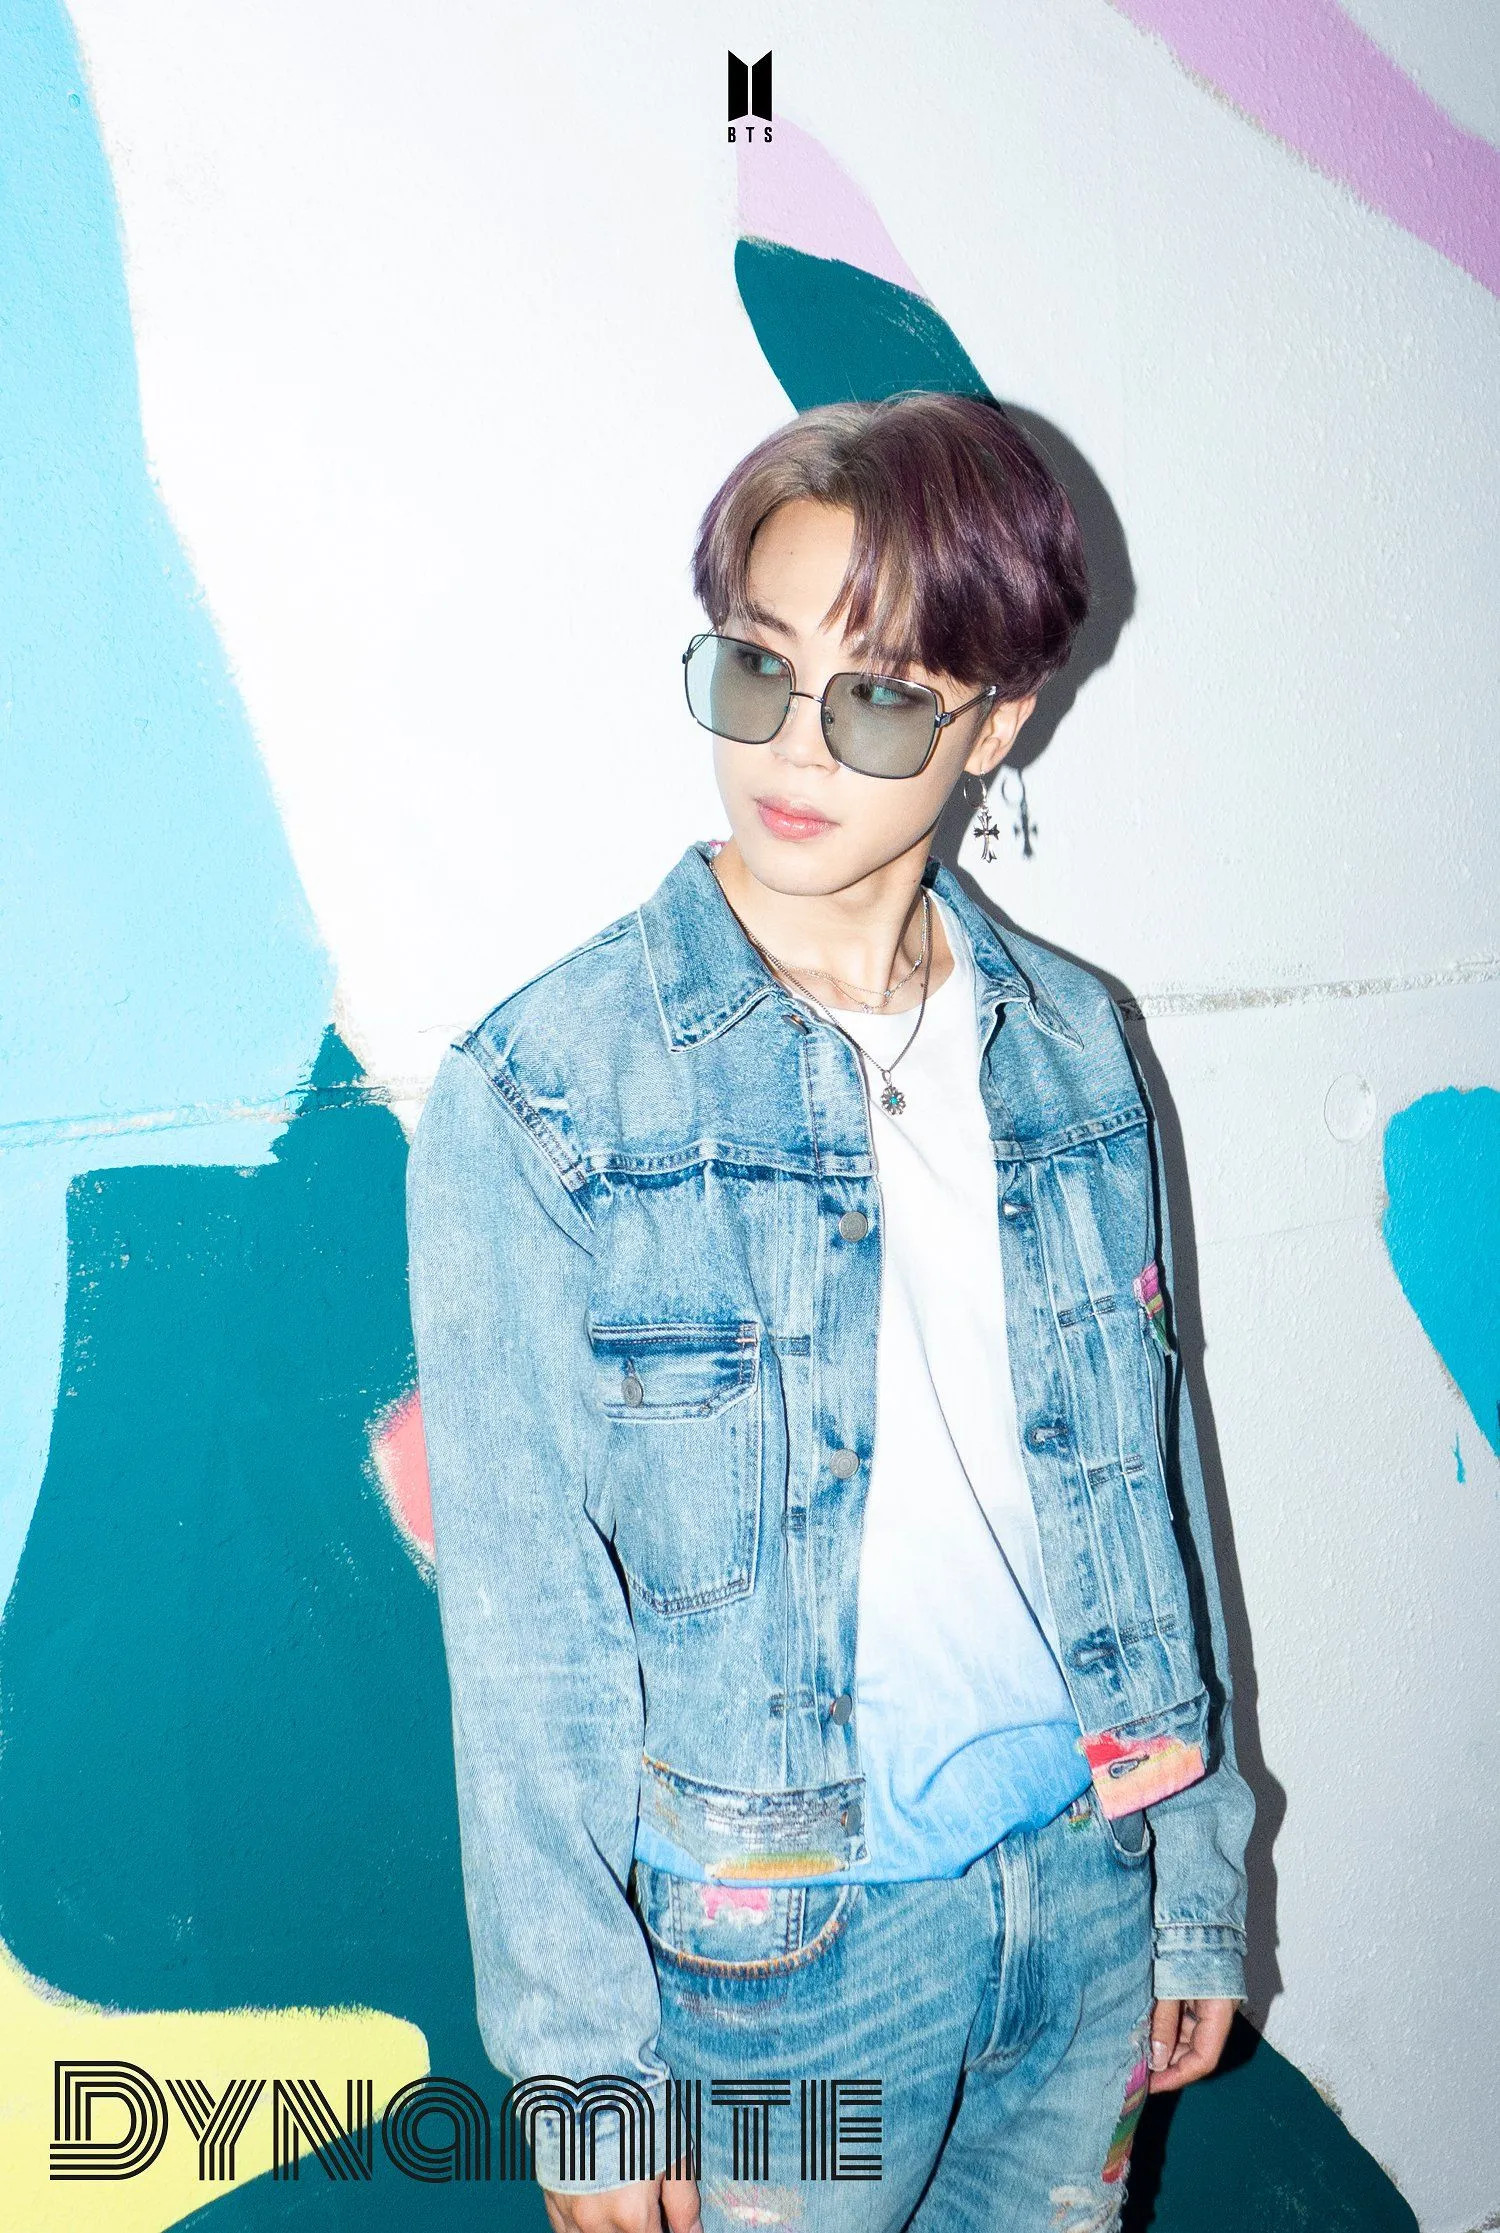 Bangtan Style⁷ (slow) on X: DYNAMITE TEASER PHOTO Jungkook was